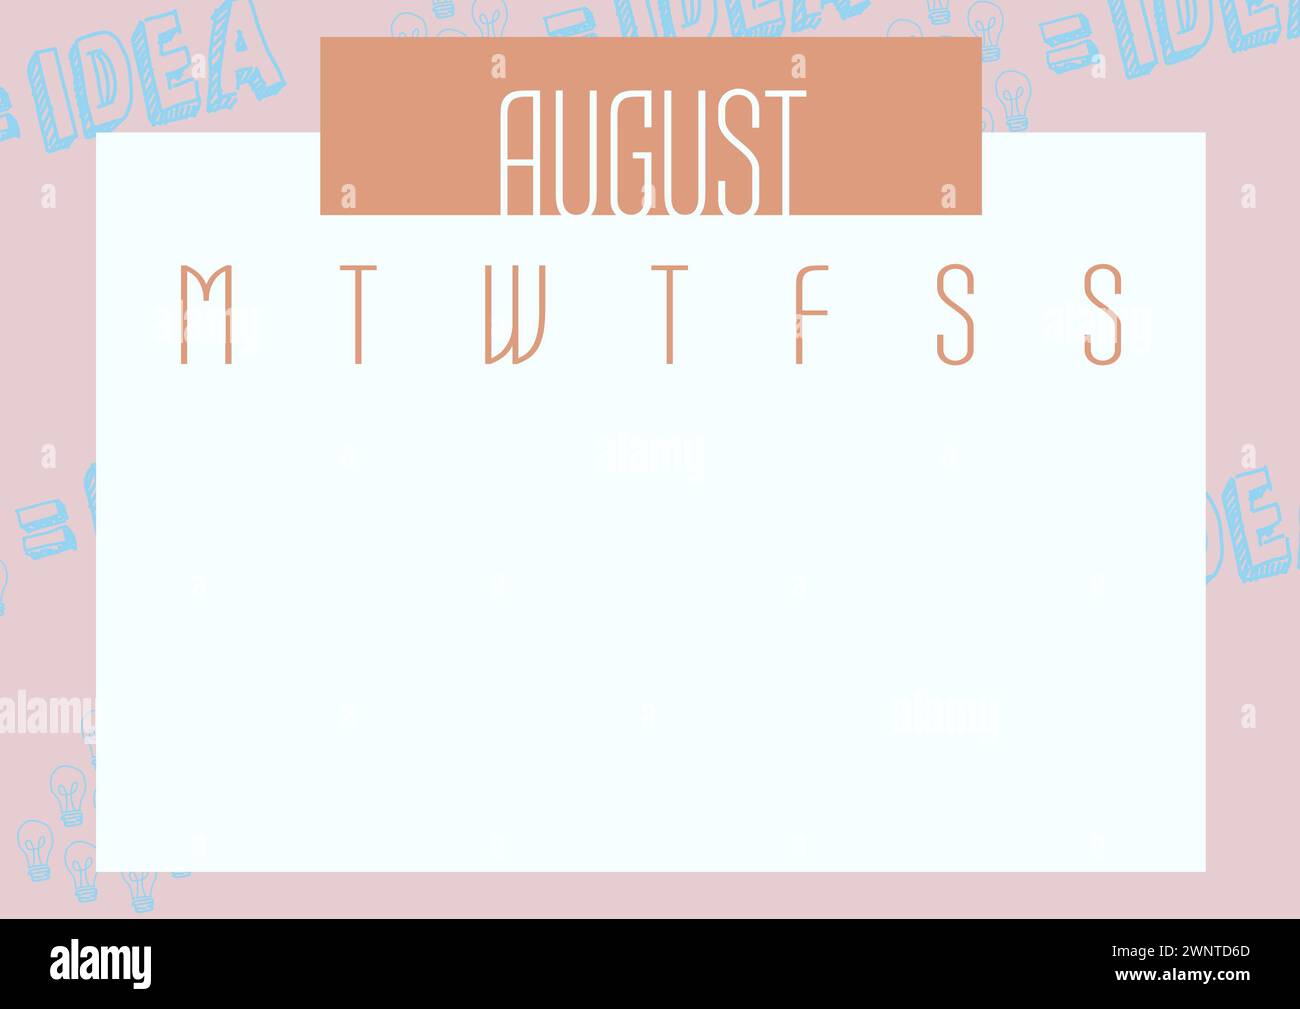 Plan your month with ease, August calendar layout Stock Photo